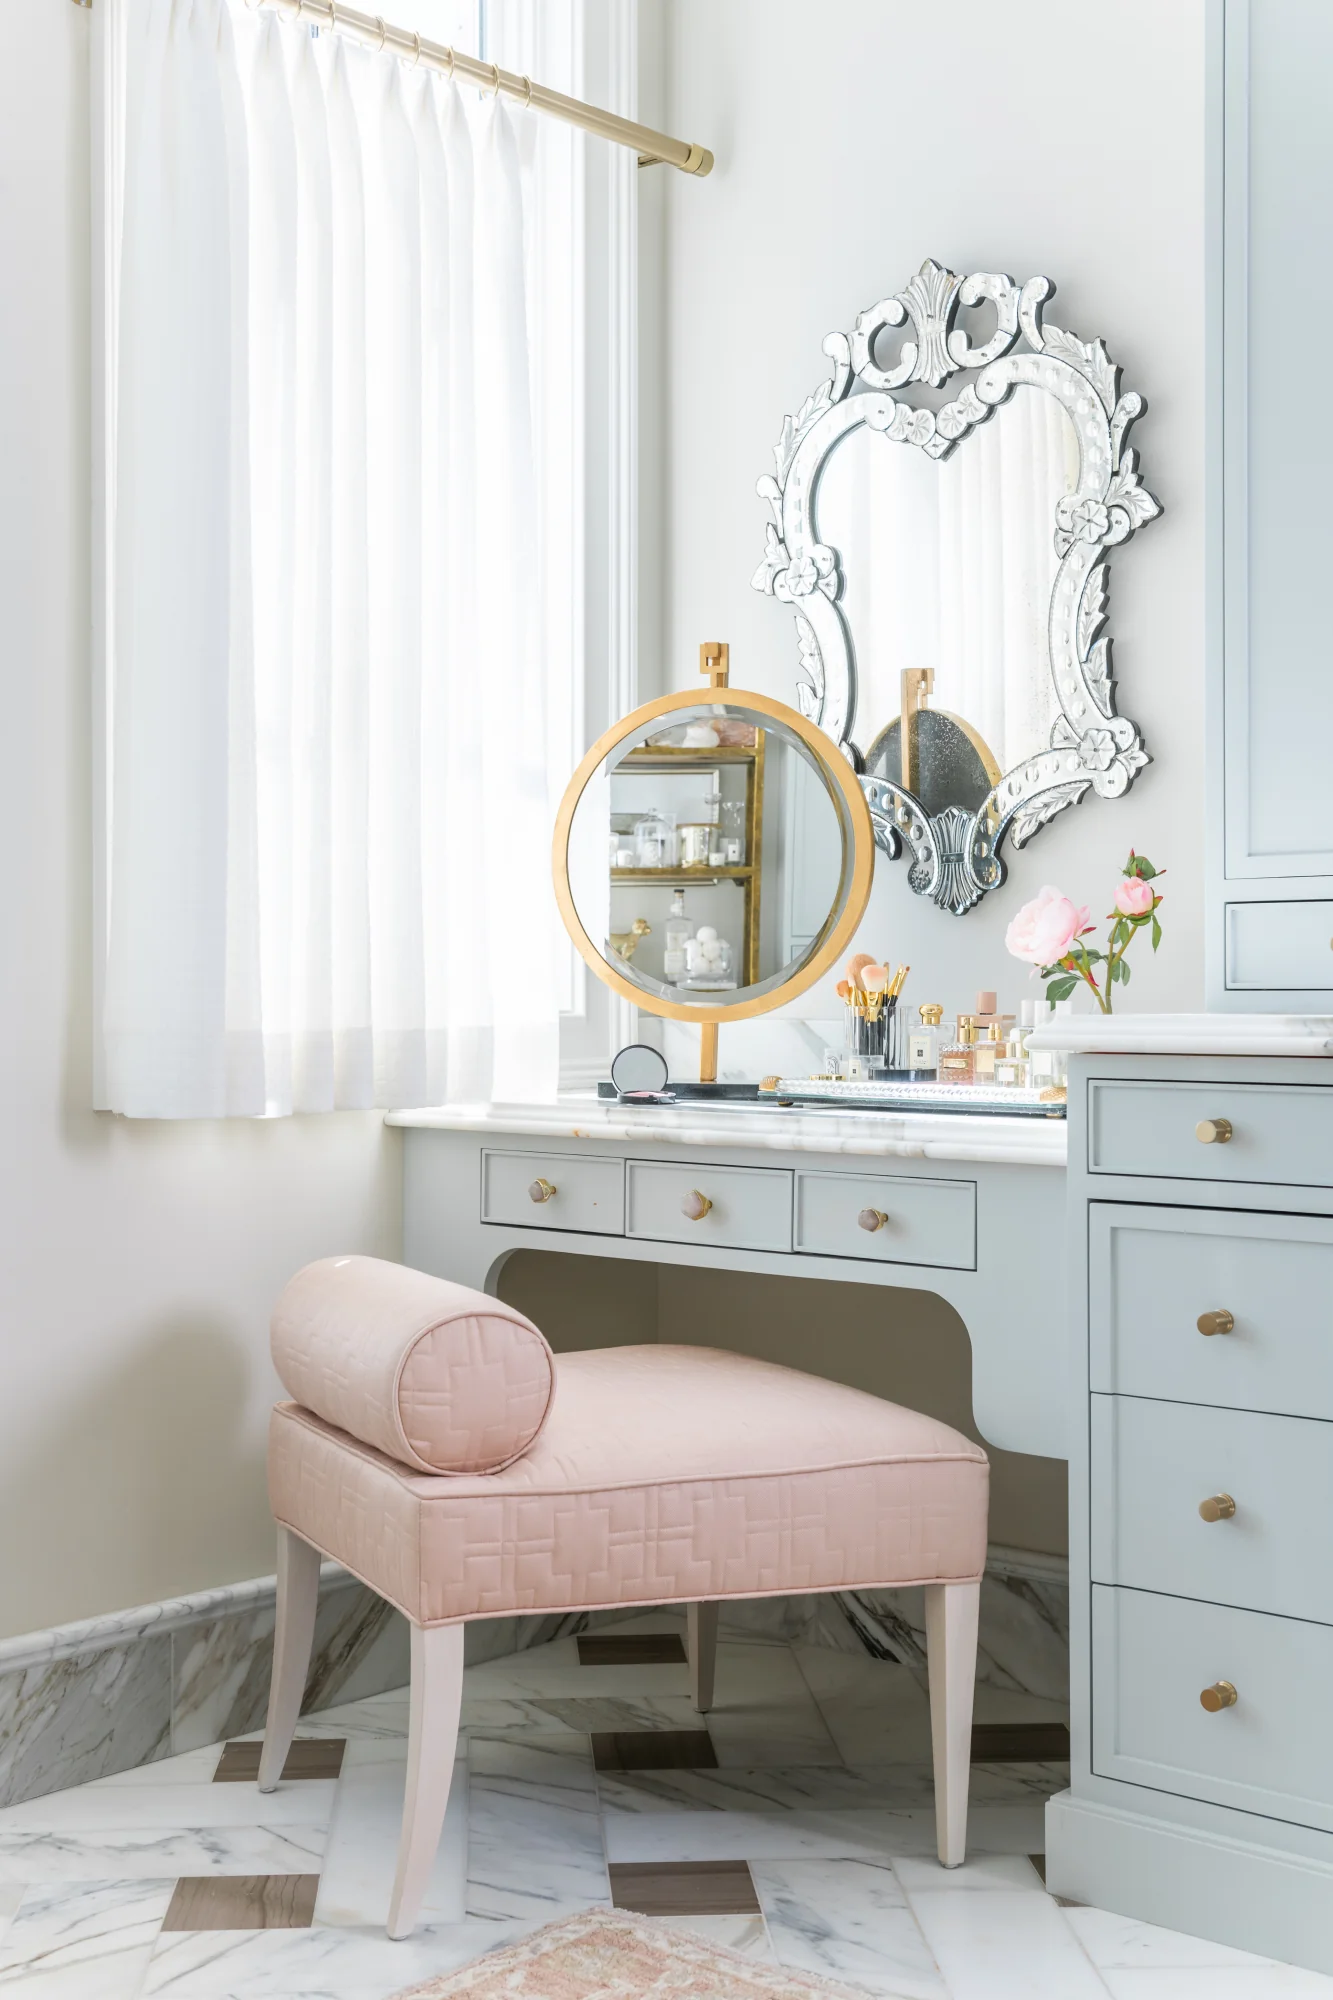 Blush vanity chair in a bathroom with light blue cabinets and gold hardware